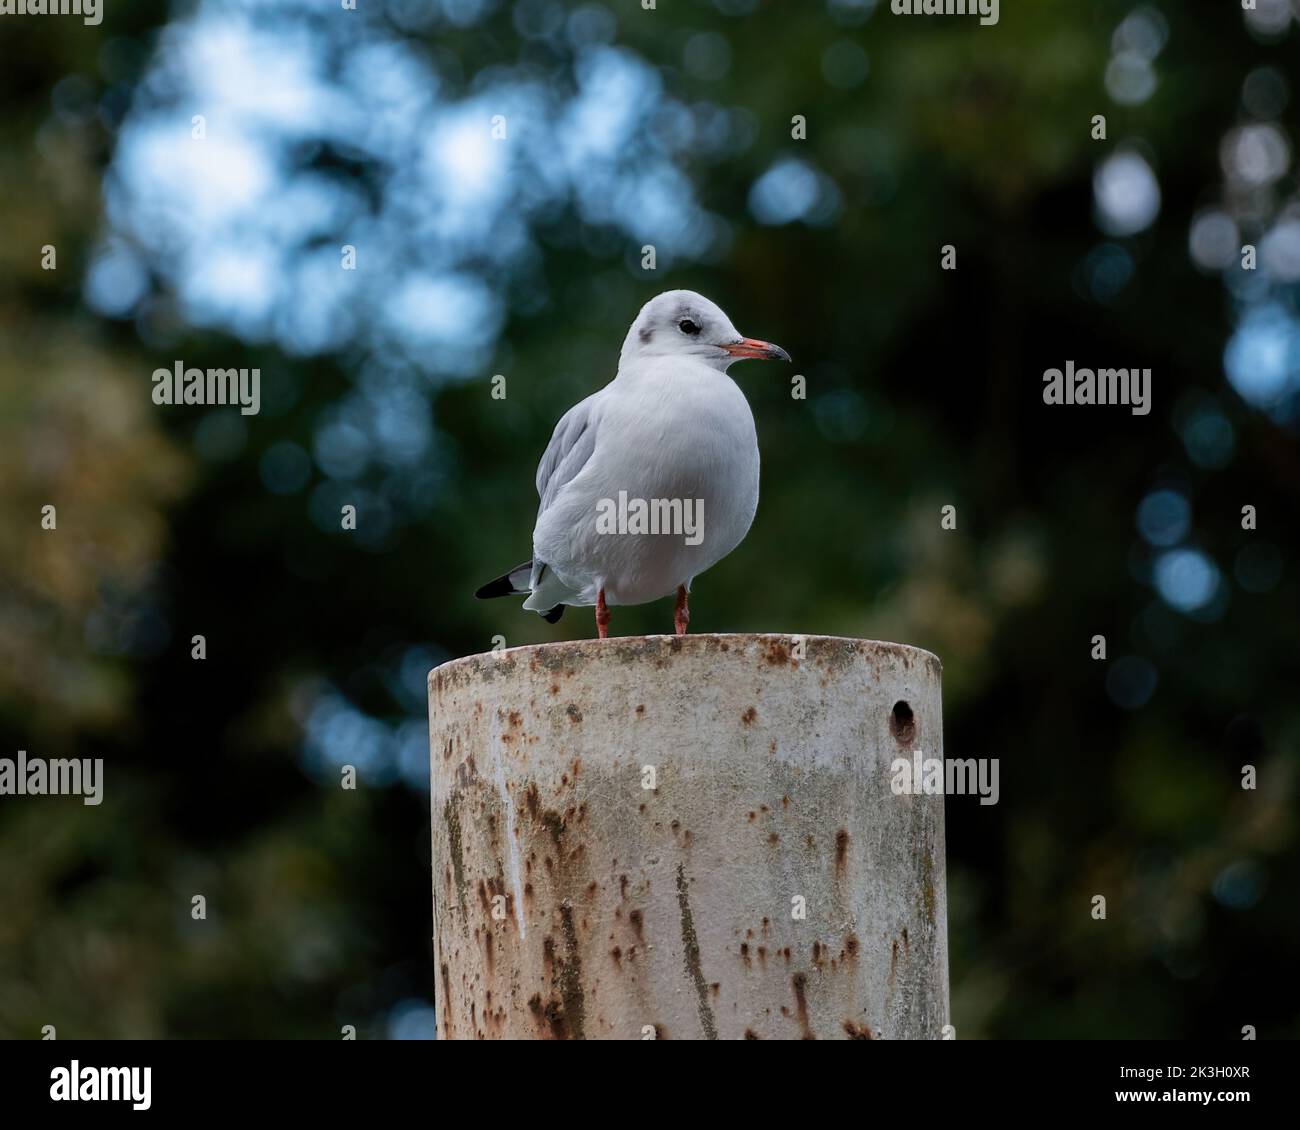 Black headed gull standing on a metal pole Stock Photo